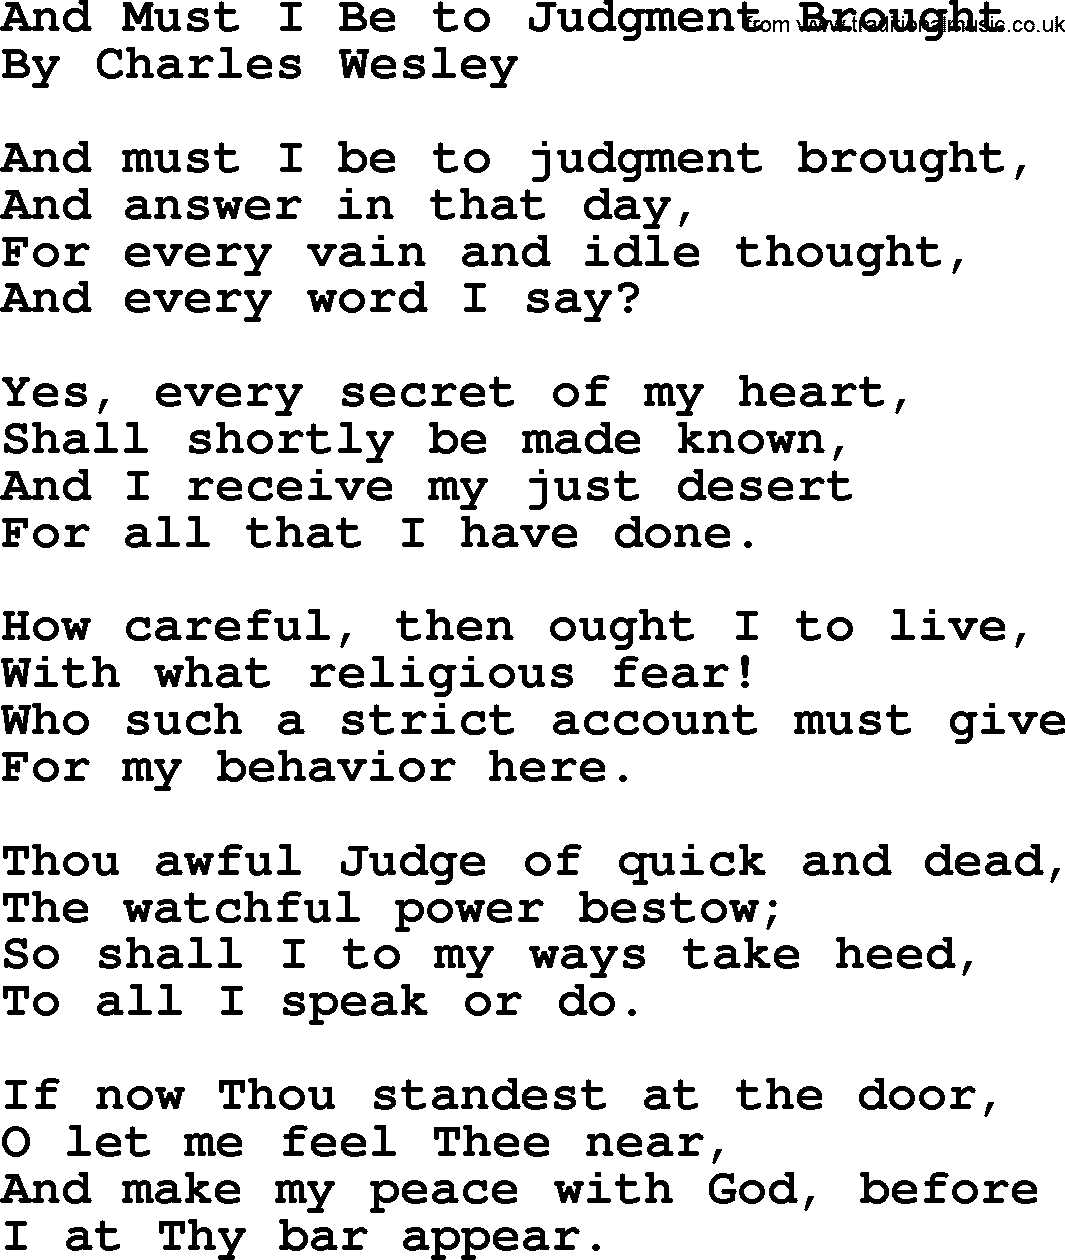 Charles Wesley hymn: And Must I Be to Judgment Brought, lyrics